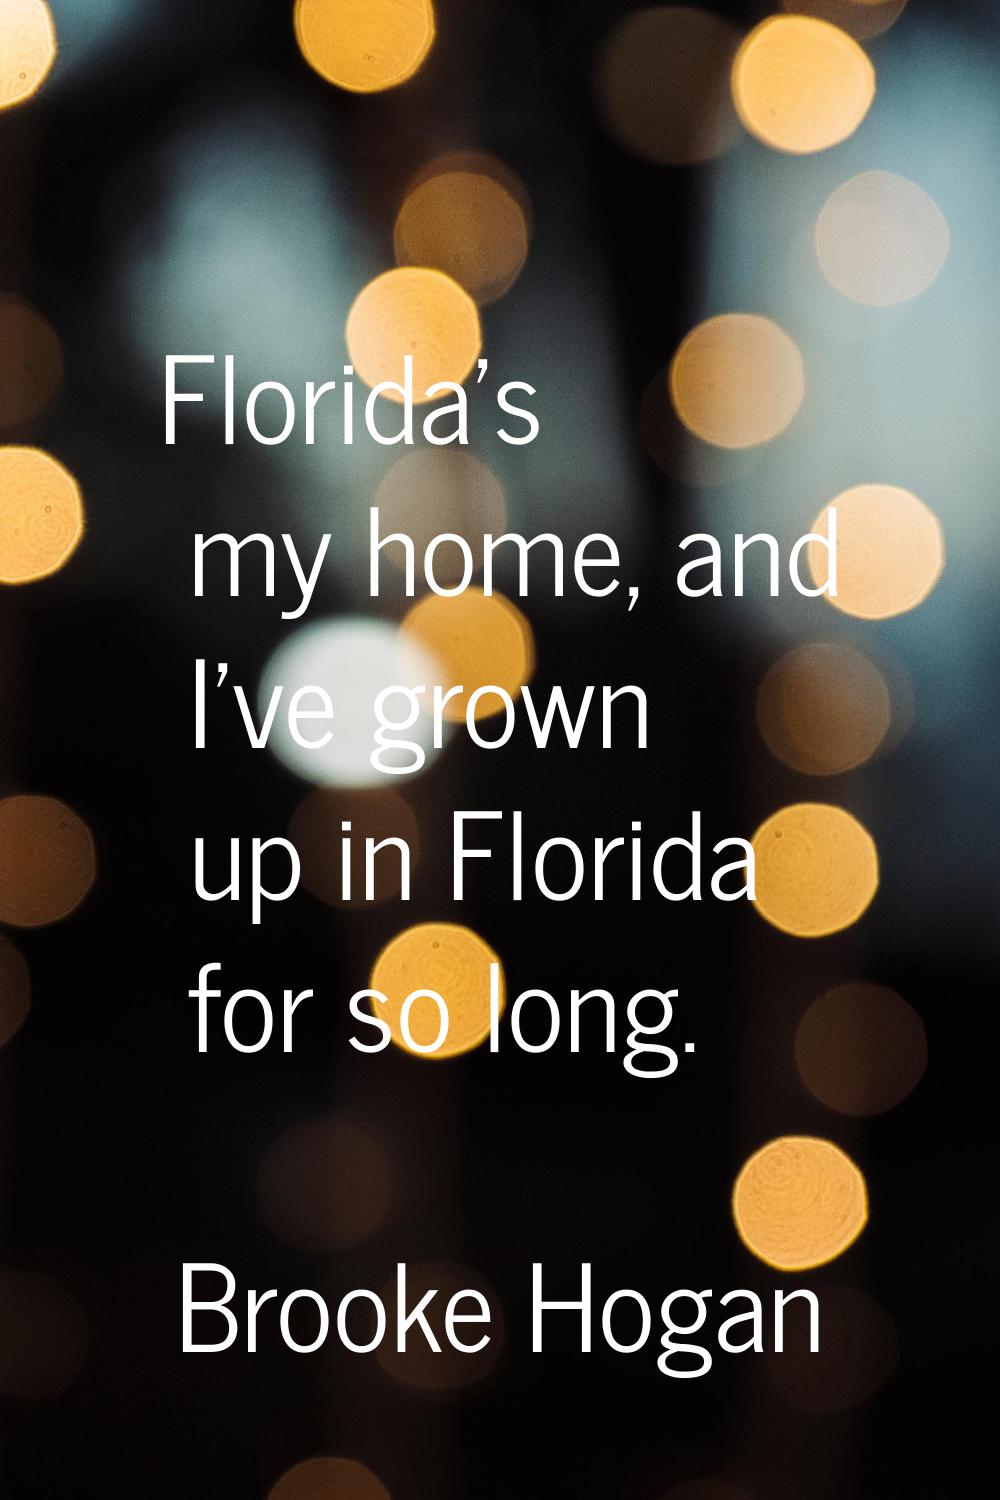 Florida's my home, and I've grown up in Florida for so long.